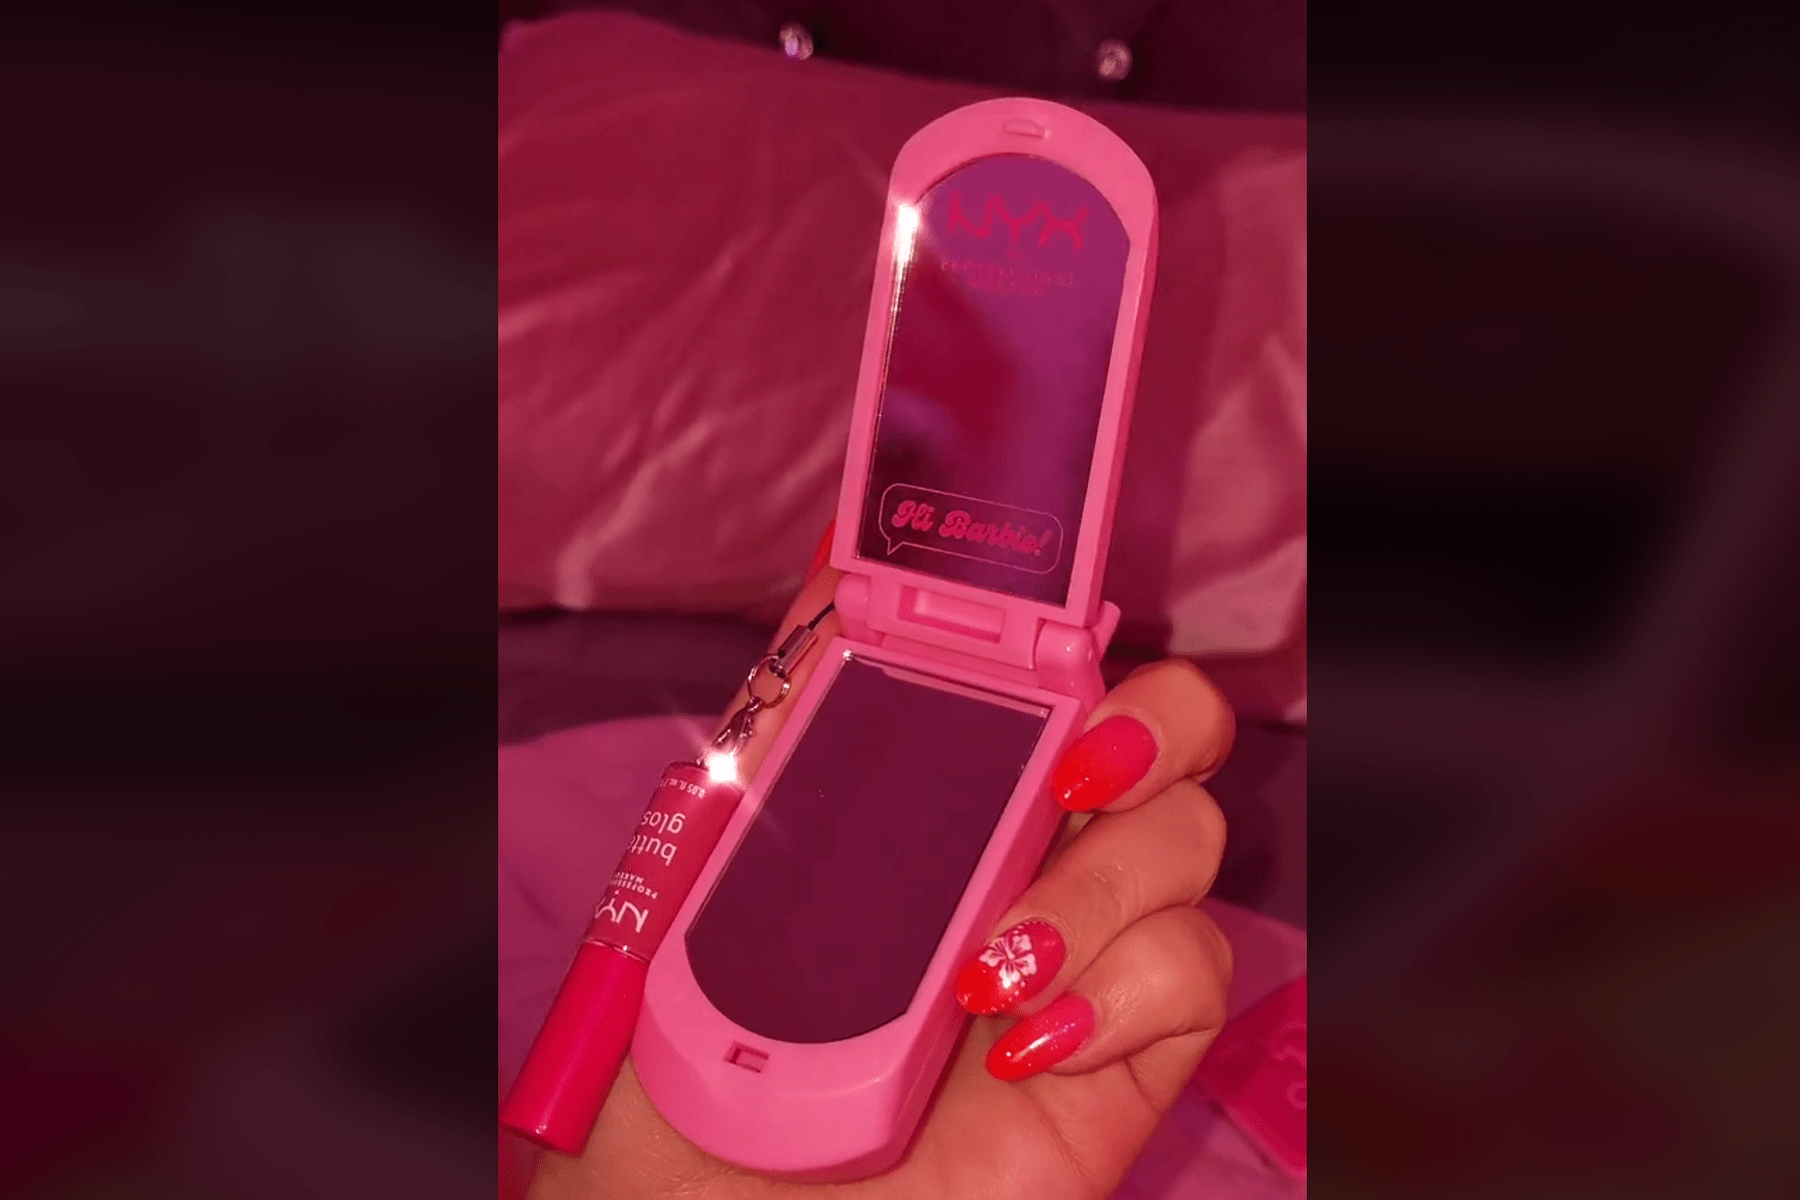 LIMITED EDITION NYX Barbie Flip Phone Mirror - Tools & accessories